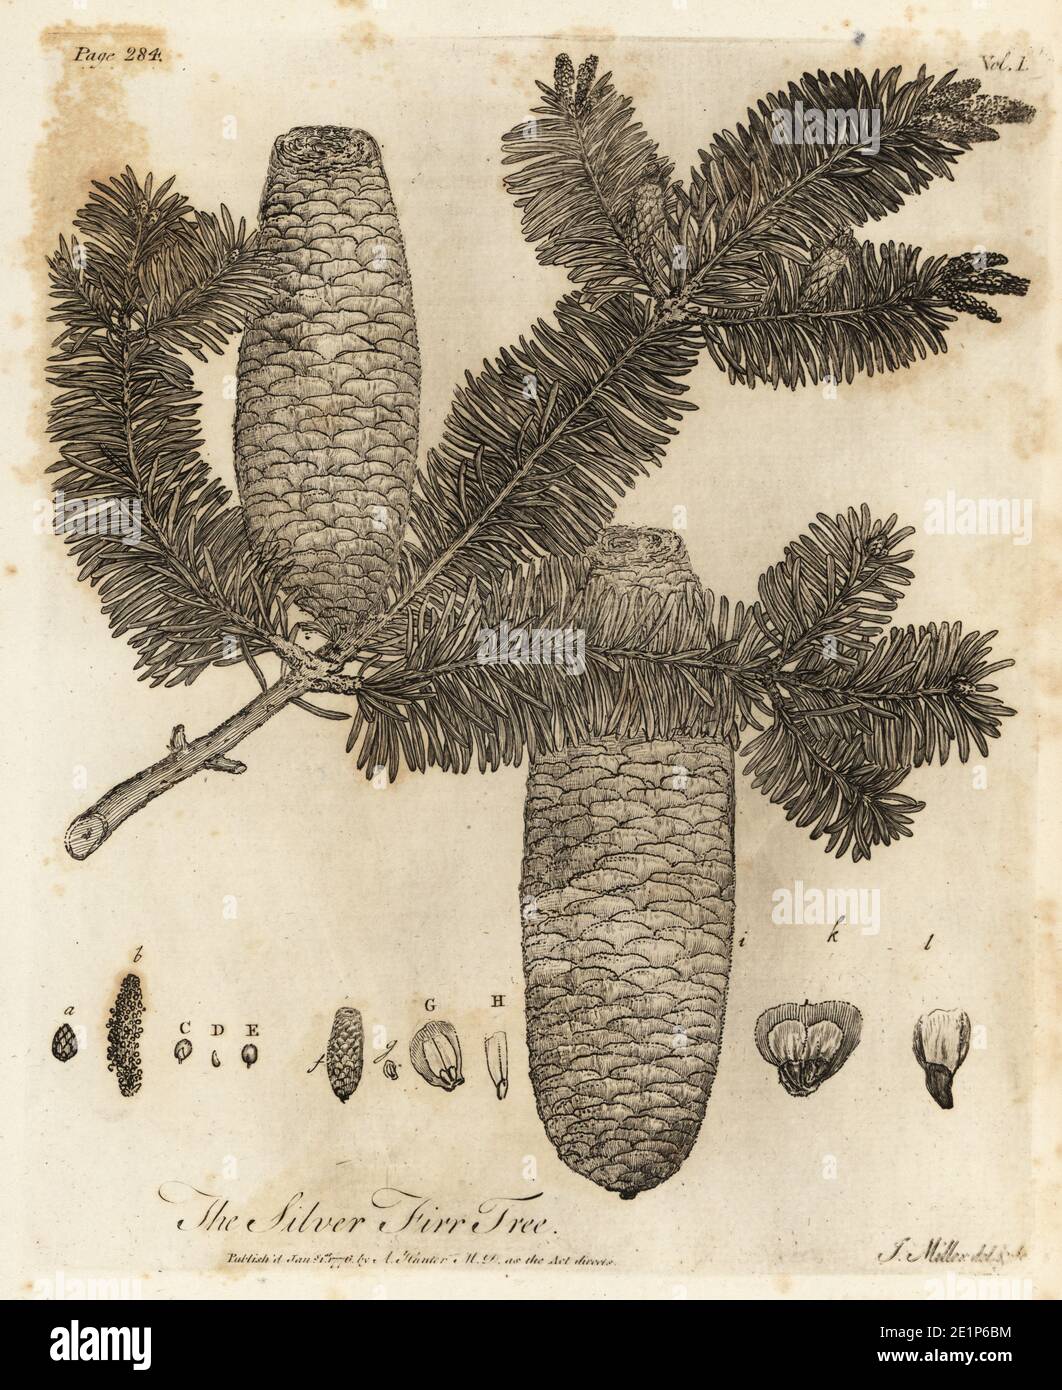 European silver fir, Abies alba. Silver Fir Tree, Pinus picea. Copperplate engraving drawn and engraved by John Miller (Johann Sebastian Muller) from John Evelyn’s Sylva, or A Discourse of Forest Trees and the Propagation of Timer, J. Dodsley, London, 1776. Stock Photo